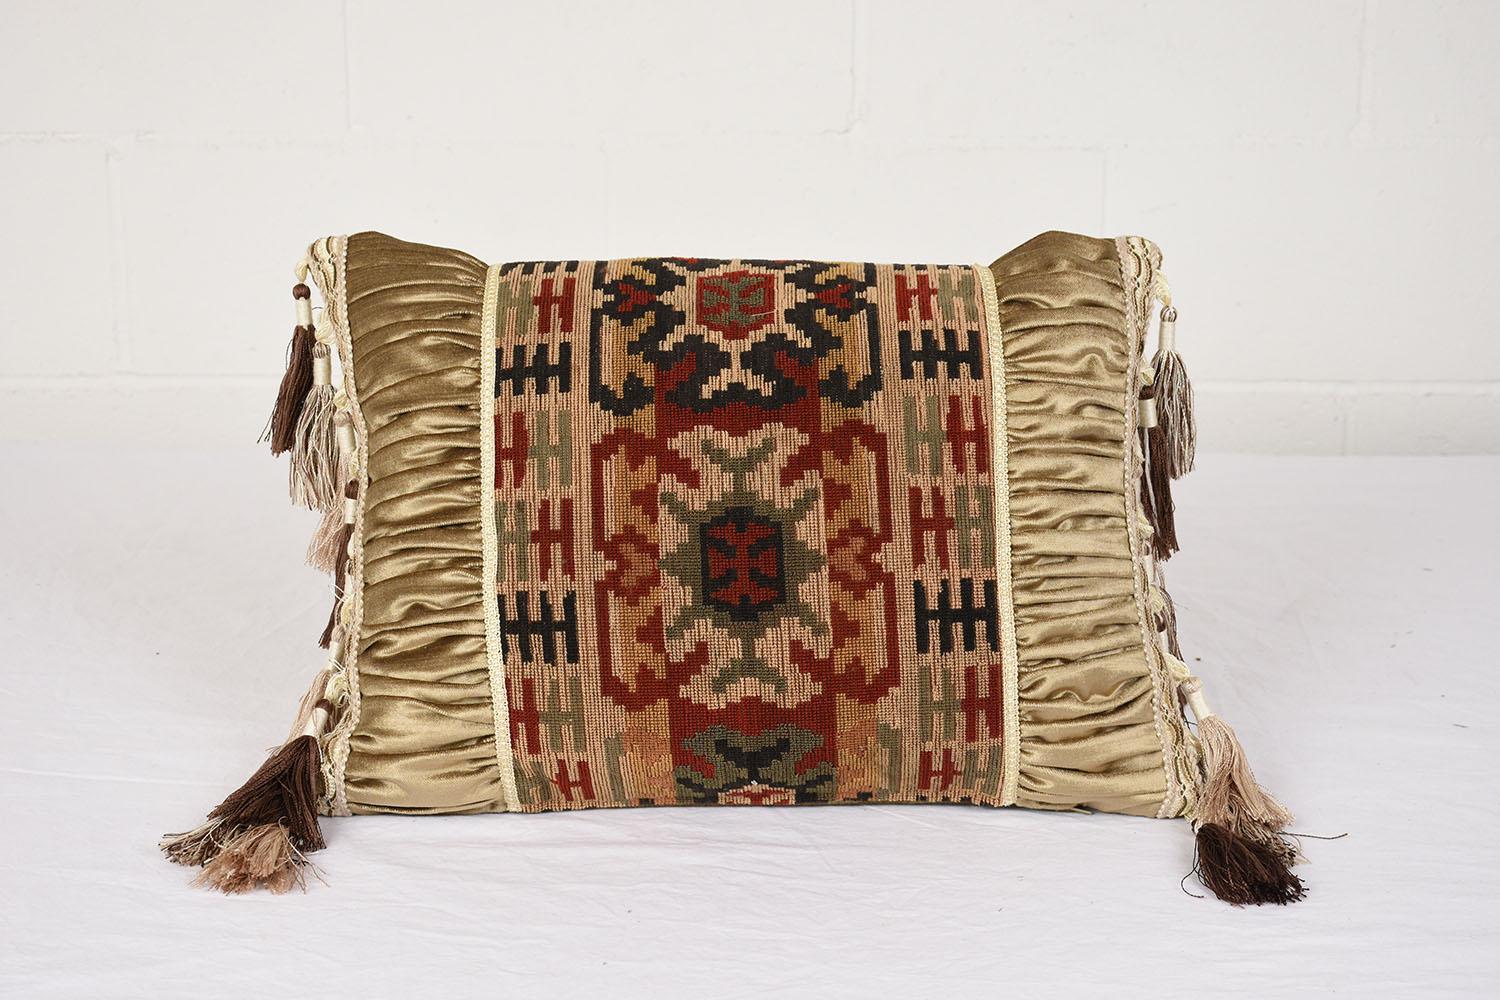 Early 20th Century 19th-Century French Antique Floral Tapestry Pillows with Gold Velvet and Tassels For Sale